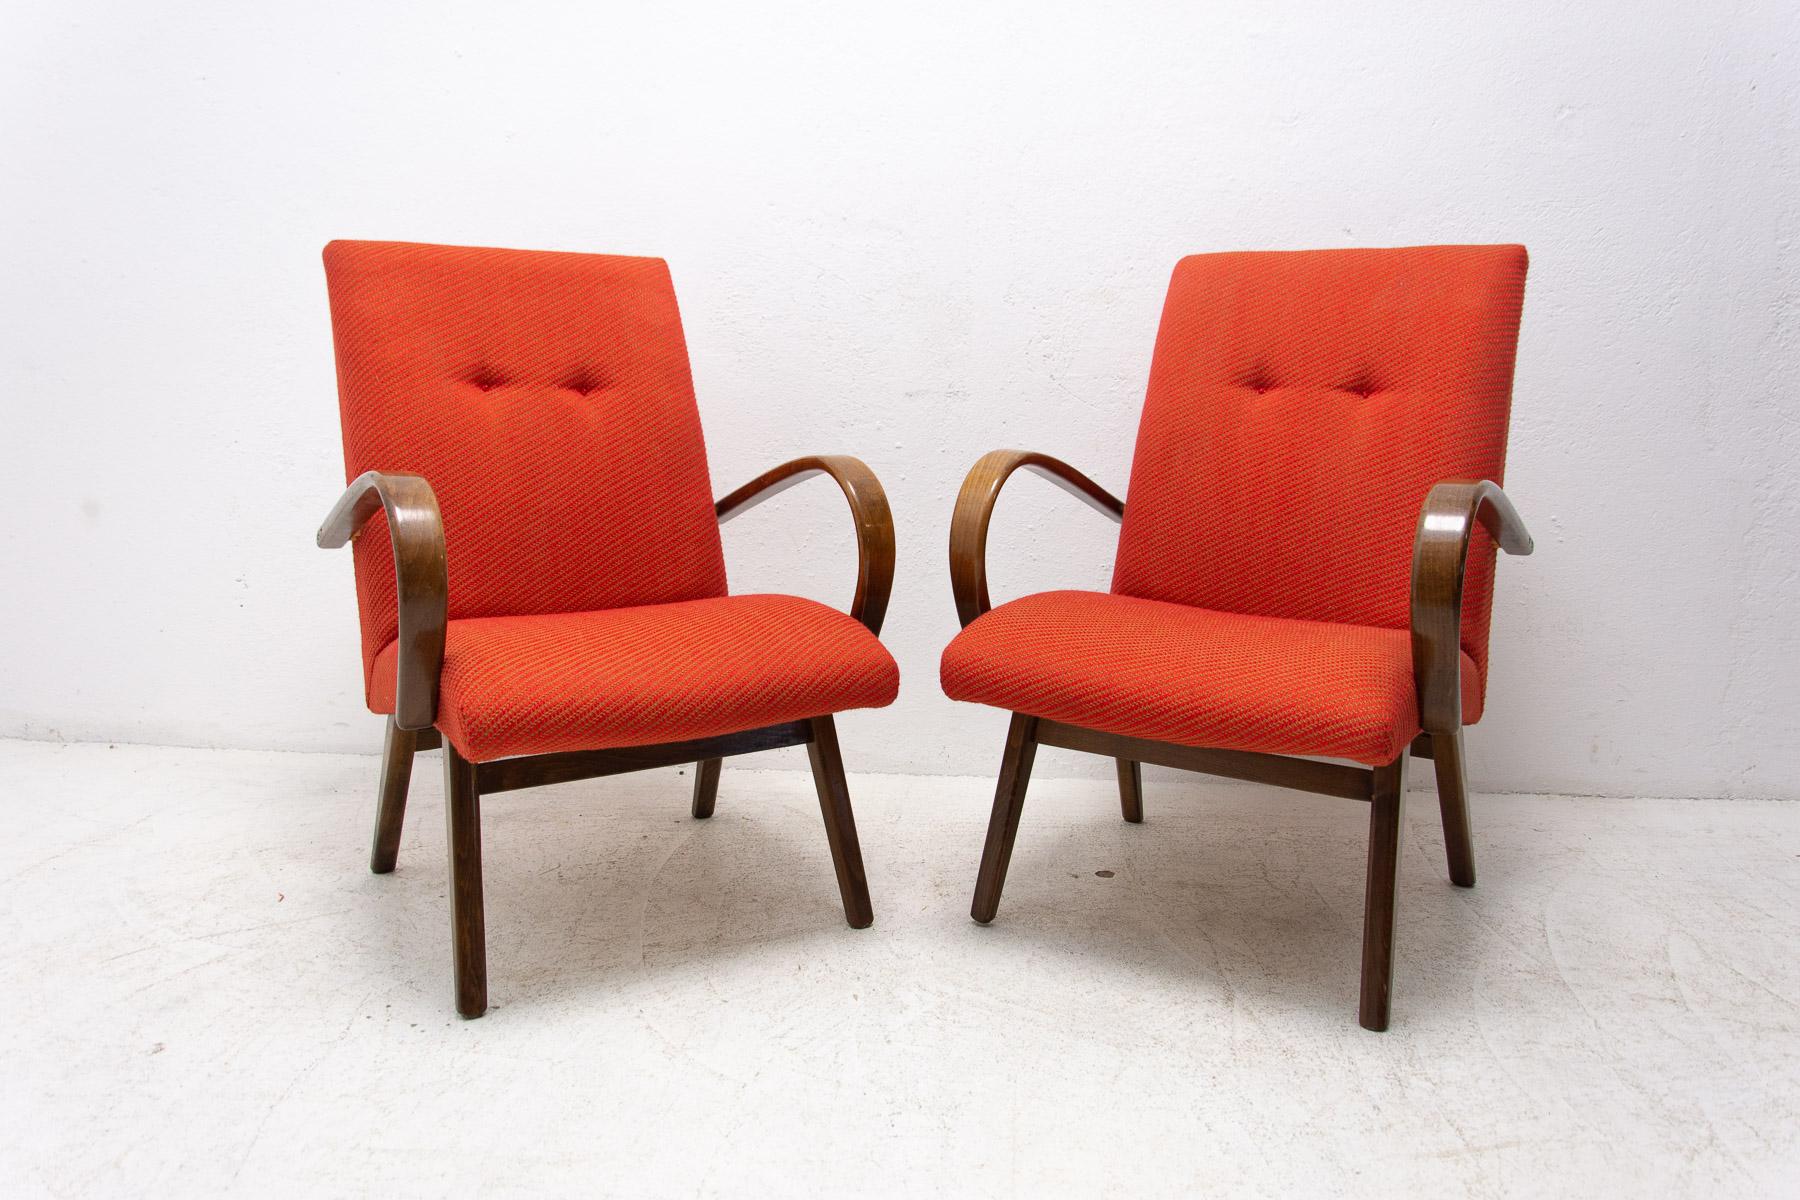 These bentwood armchairs were designed by Jaroslav Šmídek and made in the former Czechoslovakia in the 1970´s.

The chairs are stable. They are in very good Vintage condition without any damage.

Made of beech wood

Price is for the pair.

